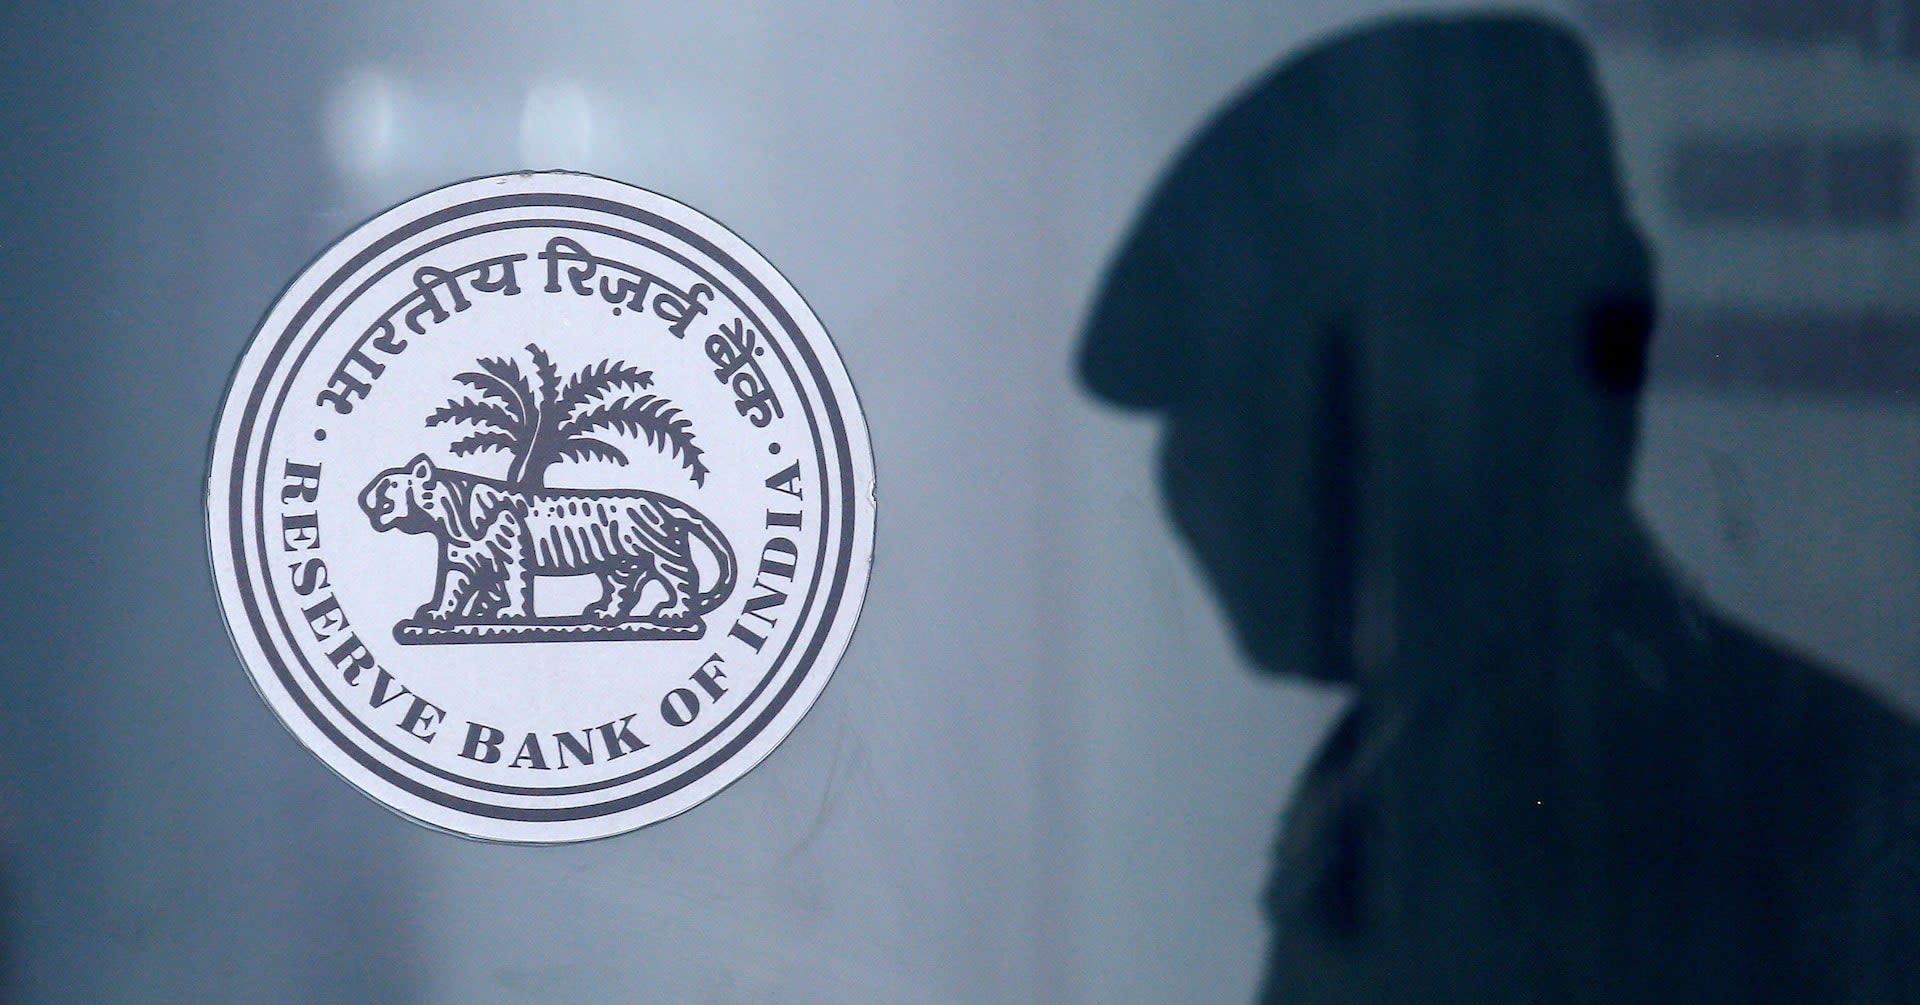 India cenbank issues guidance note on operational risk management, resilience